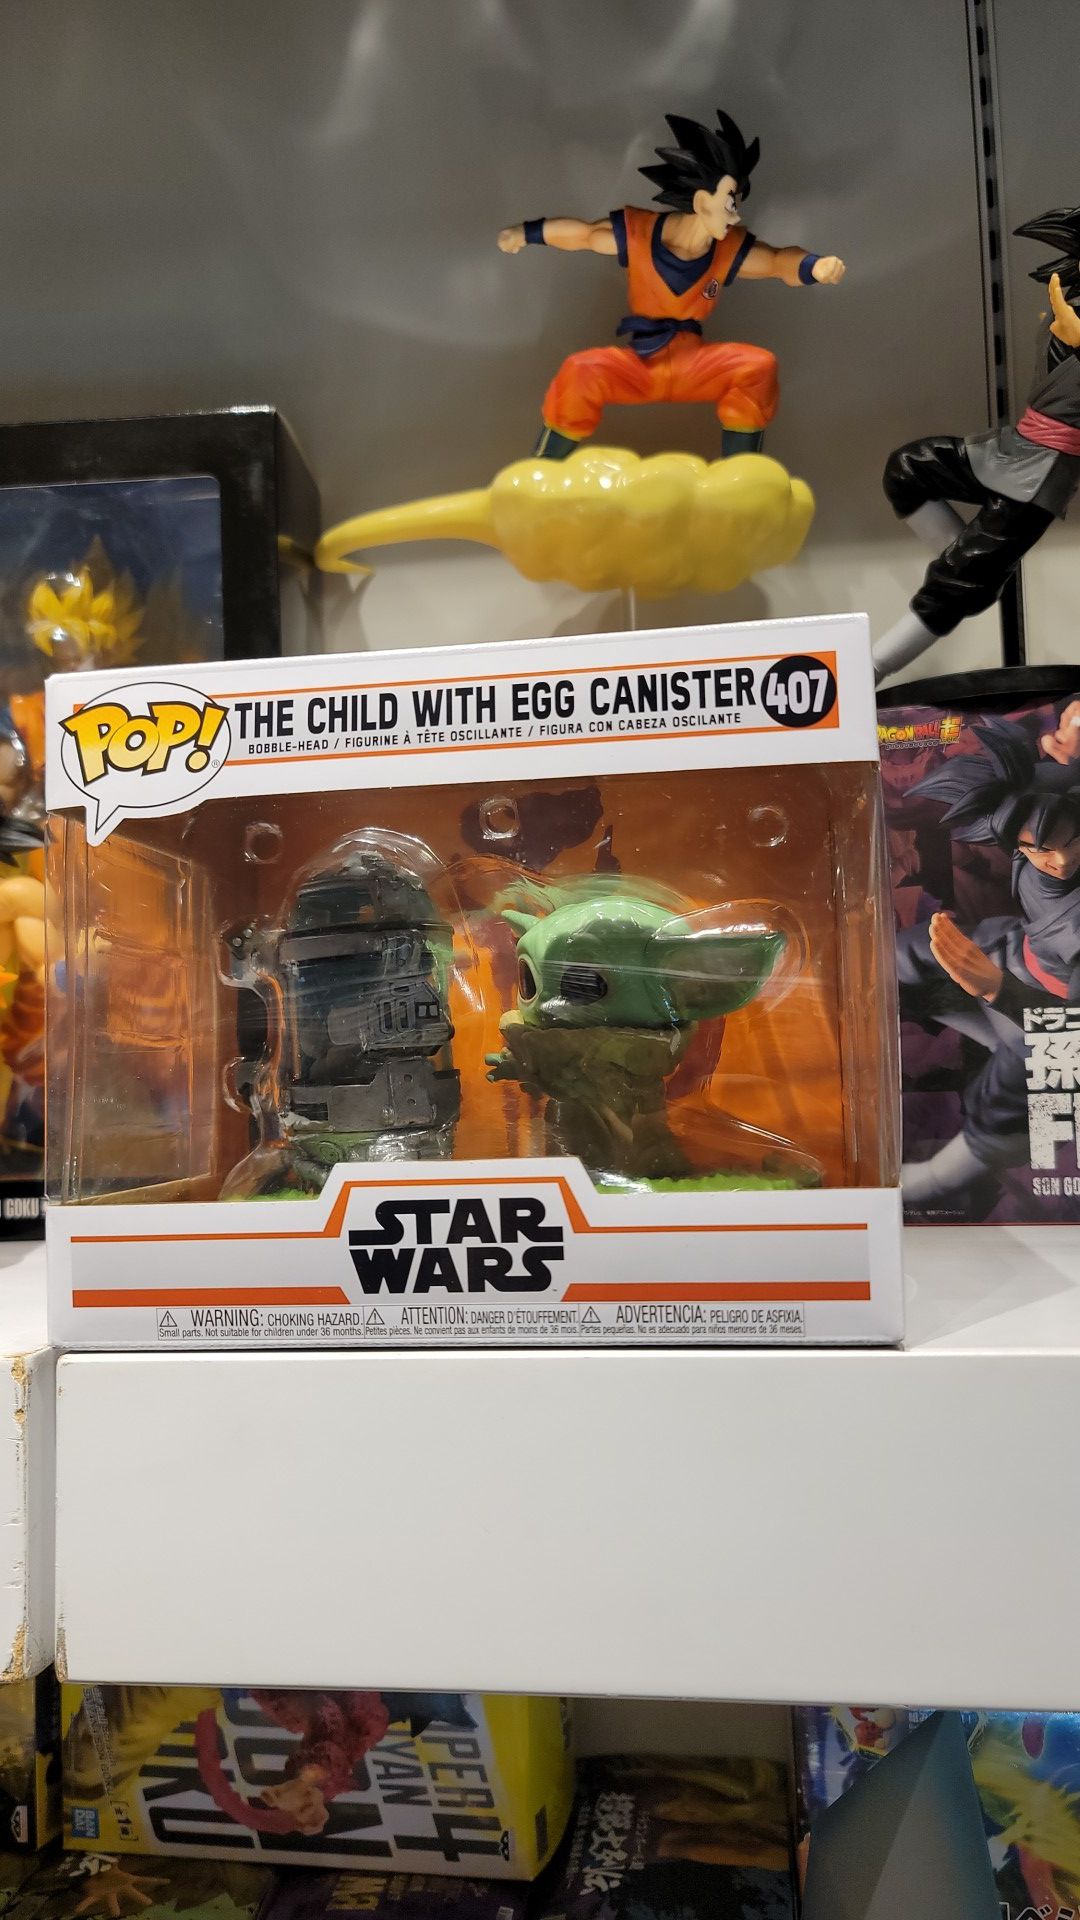 THE CHILD WITH EGG CANISTER # 407 Funko POP! STAR WARS THE MANDALORIAN